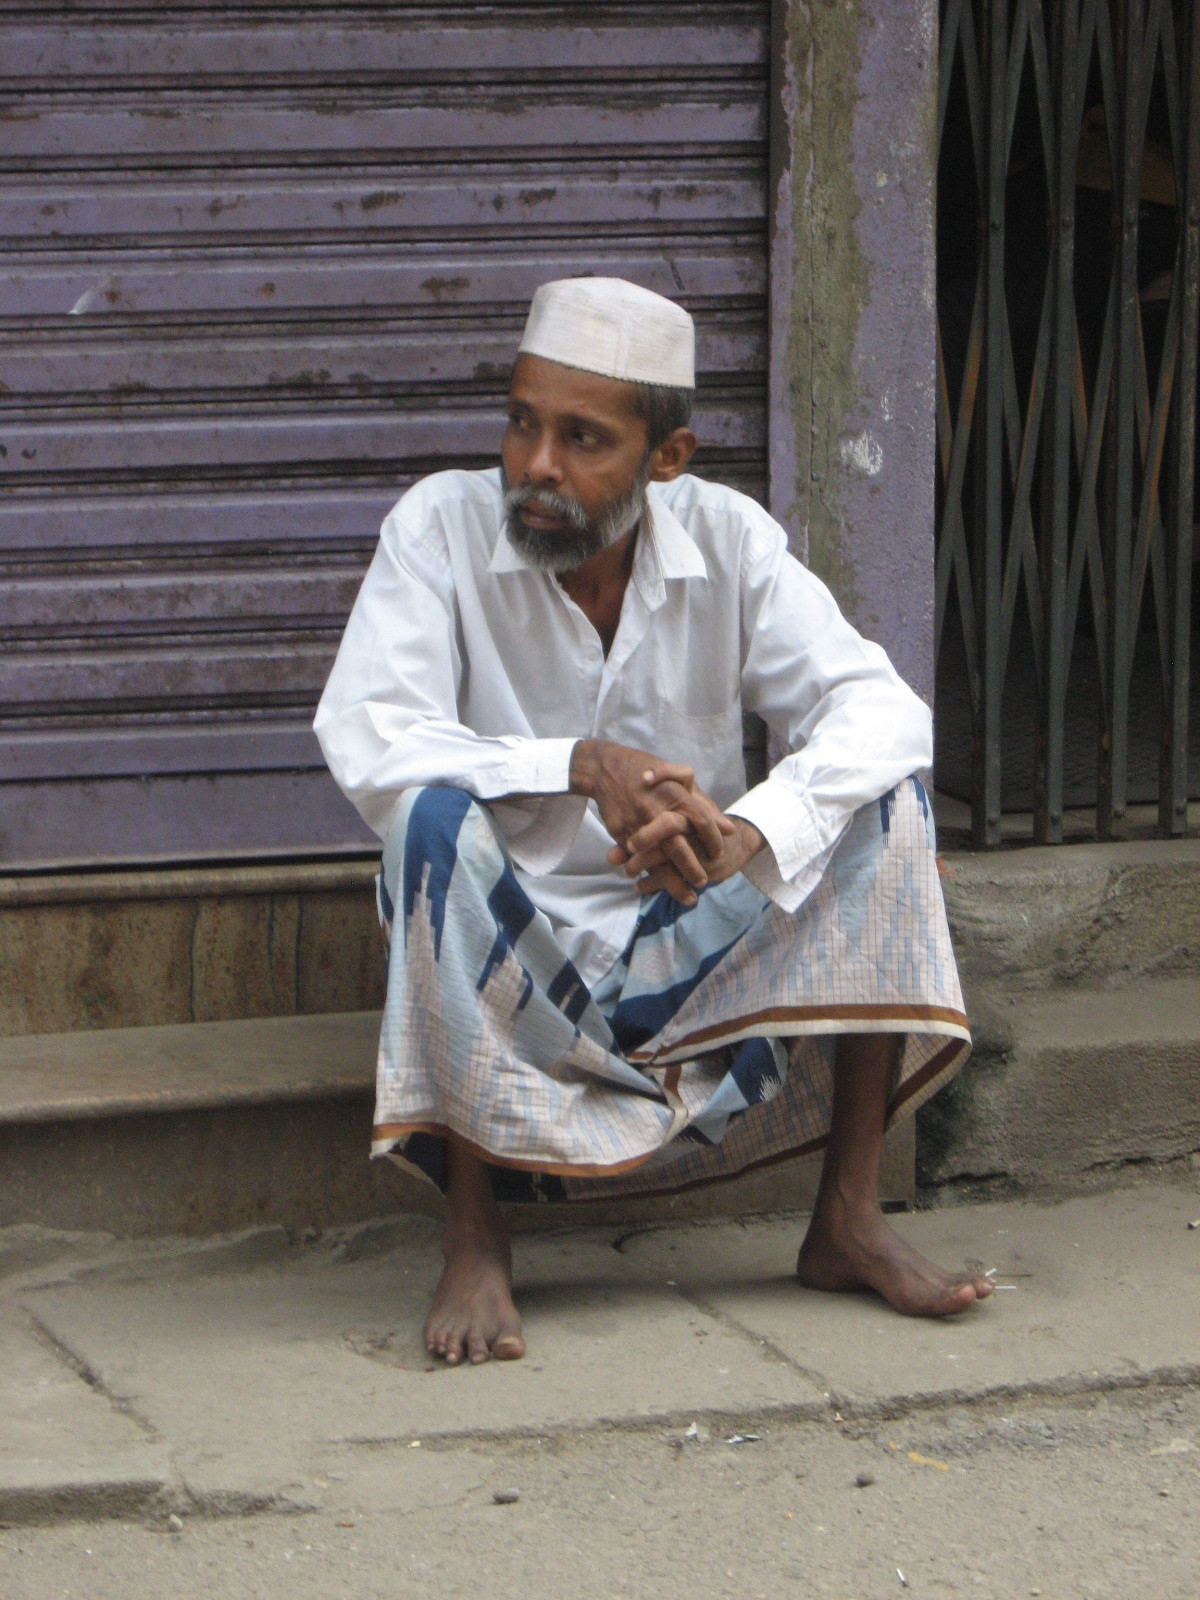 Muslim face of Colombo